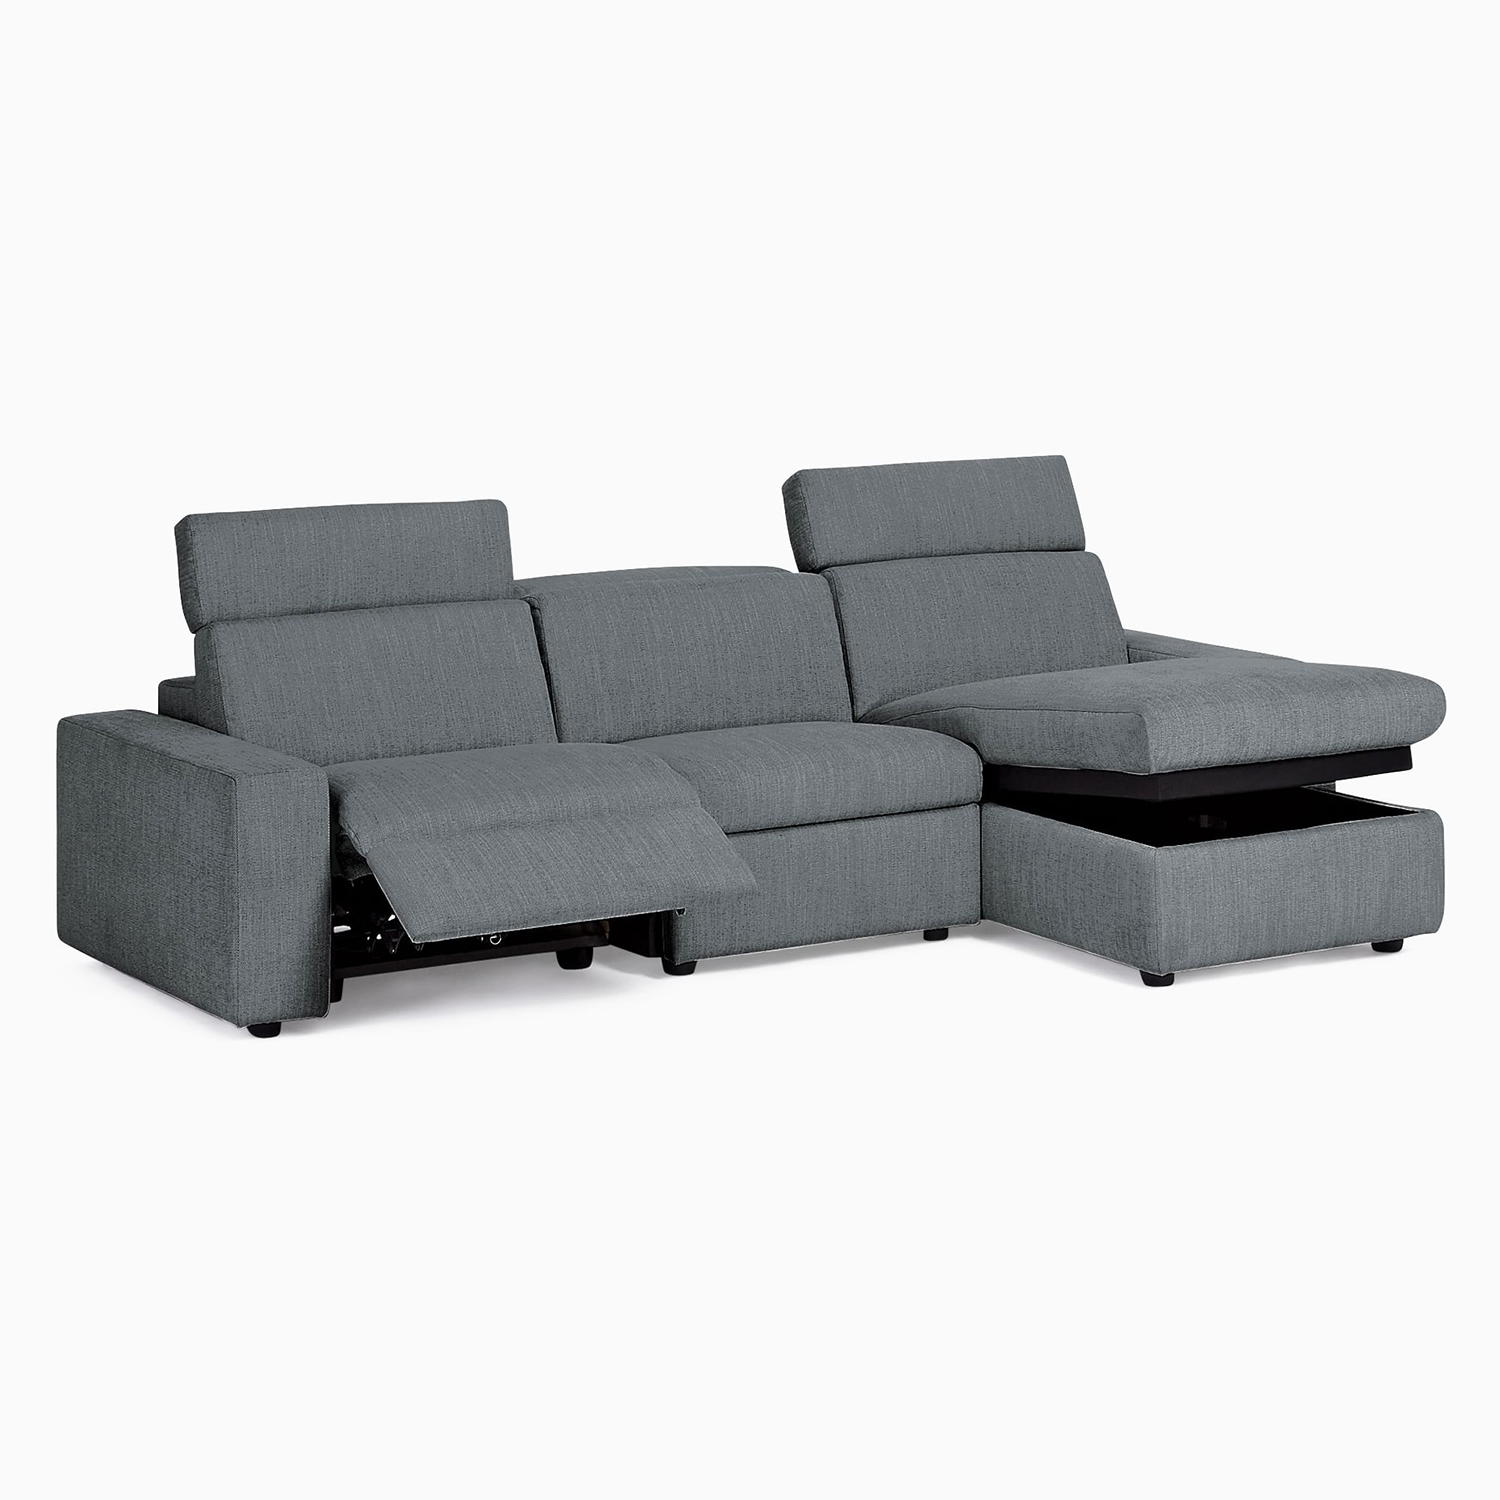 West Elm Enzo 3-Piece Recline Chaise Sectional